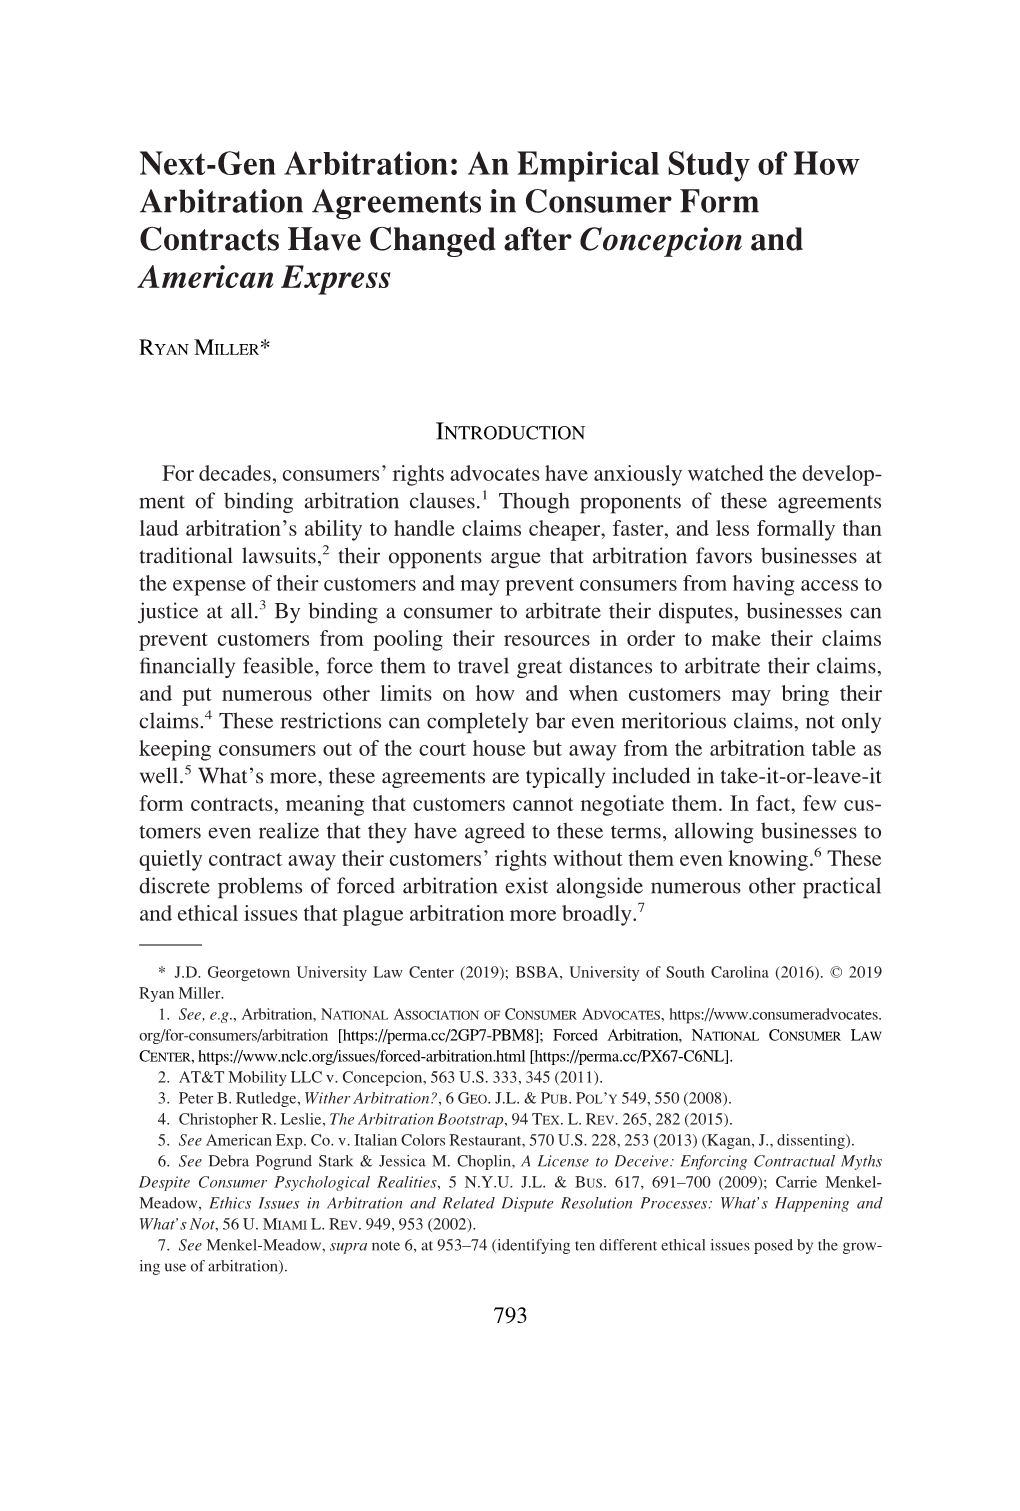 Next-Gen Arbitration: an Empirical Study of How Arbitration Agreements in Consumer Form Contracts Have Changed After Concepcion and American Express